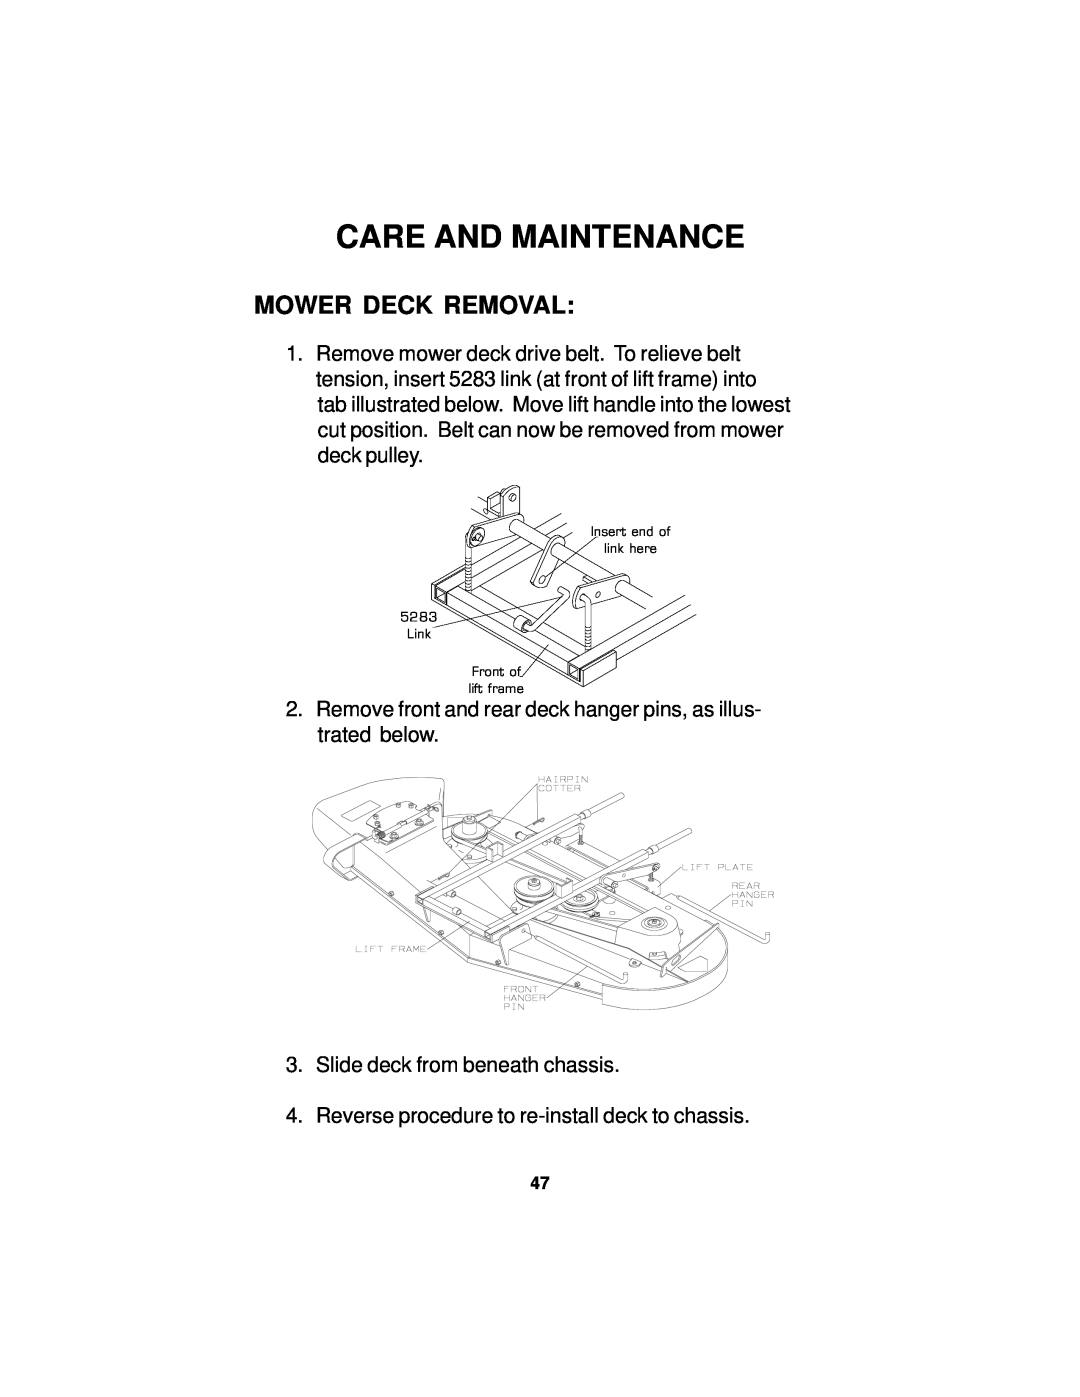 Dixon 18124-0804 manual Mower Deck Removal, Care And Maintenance 